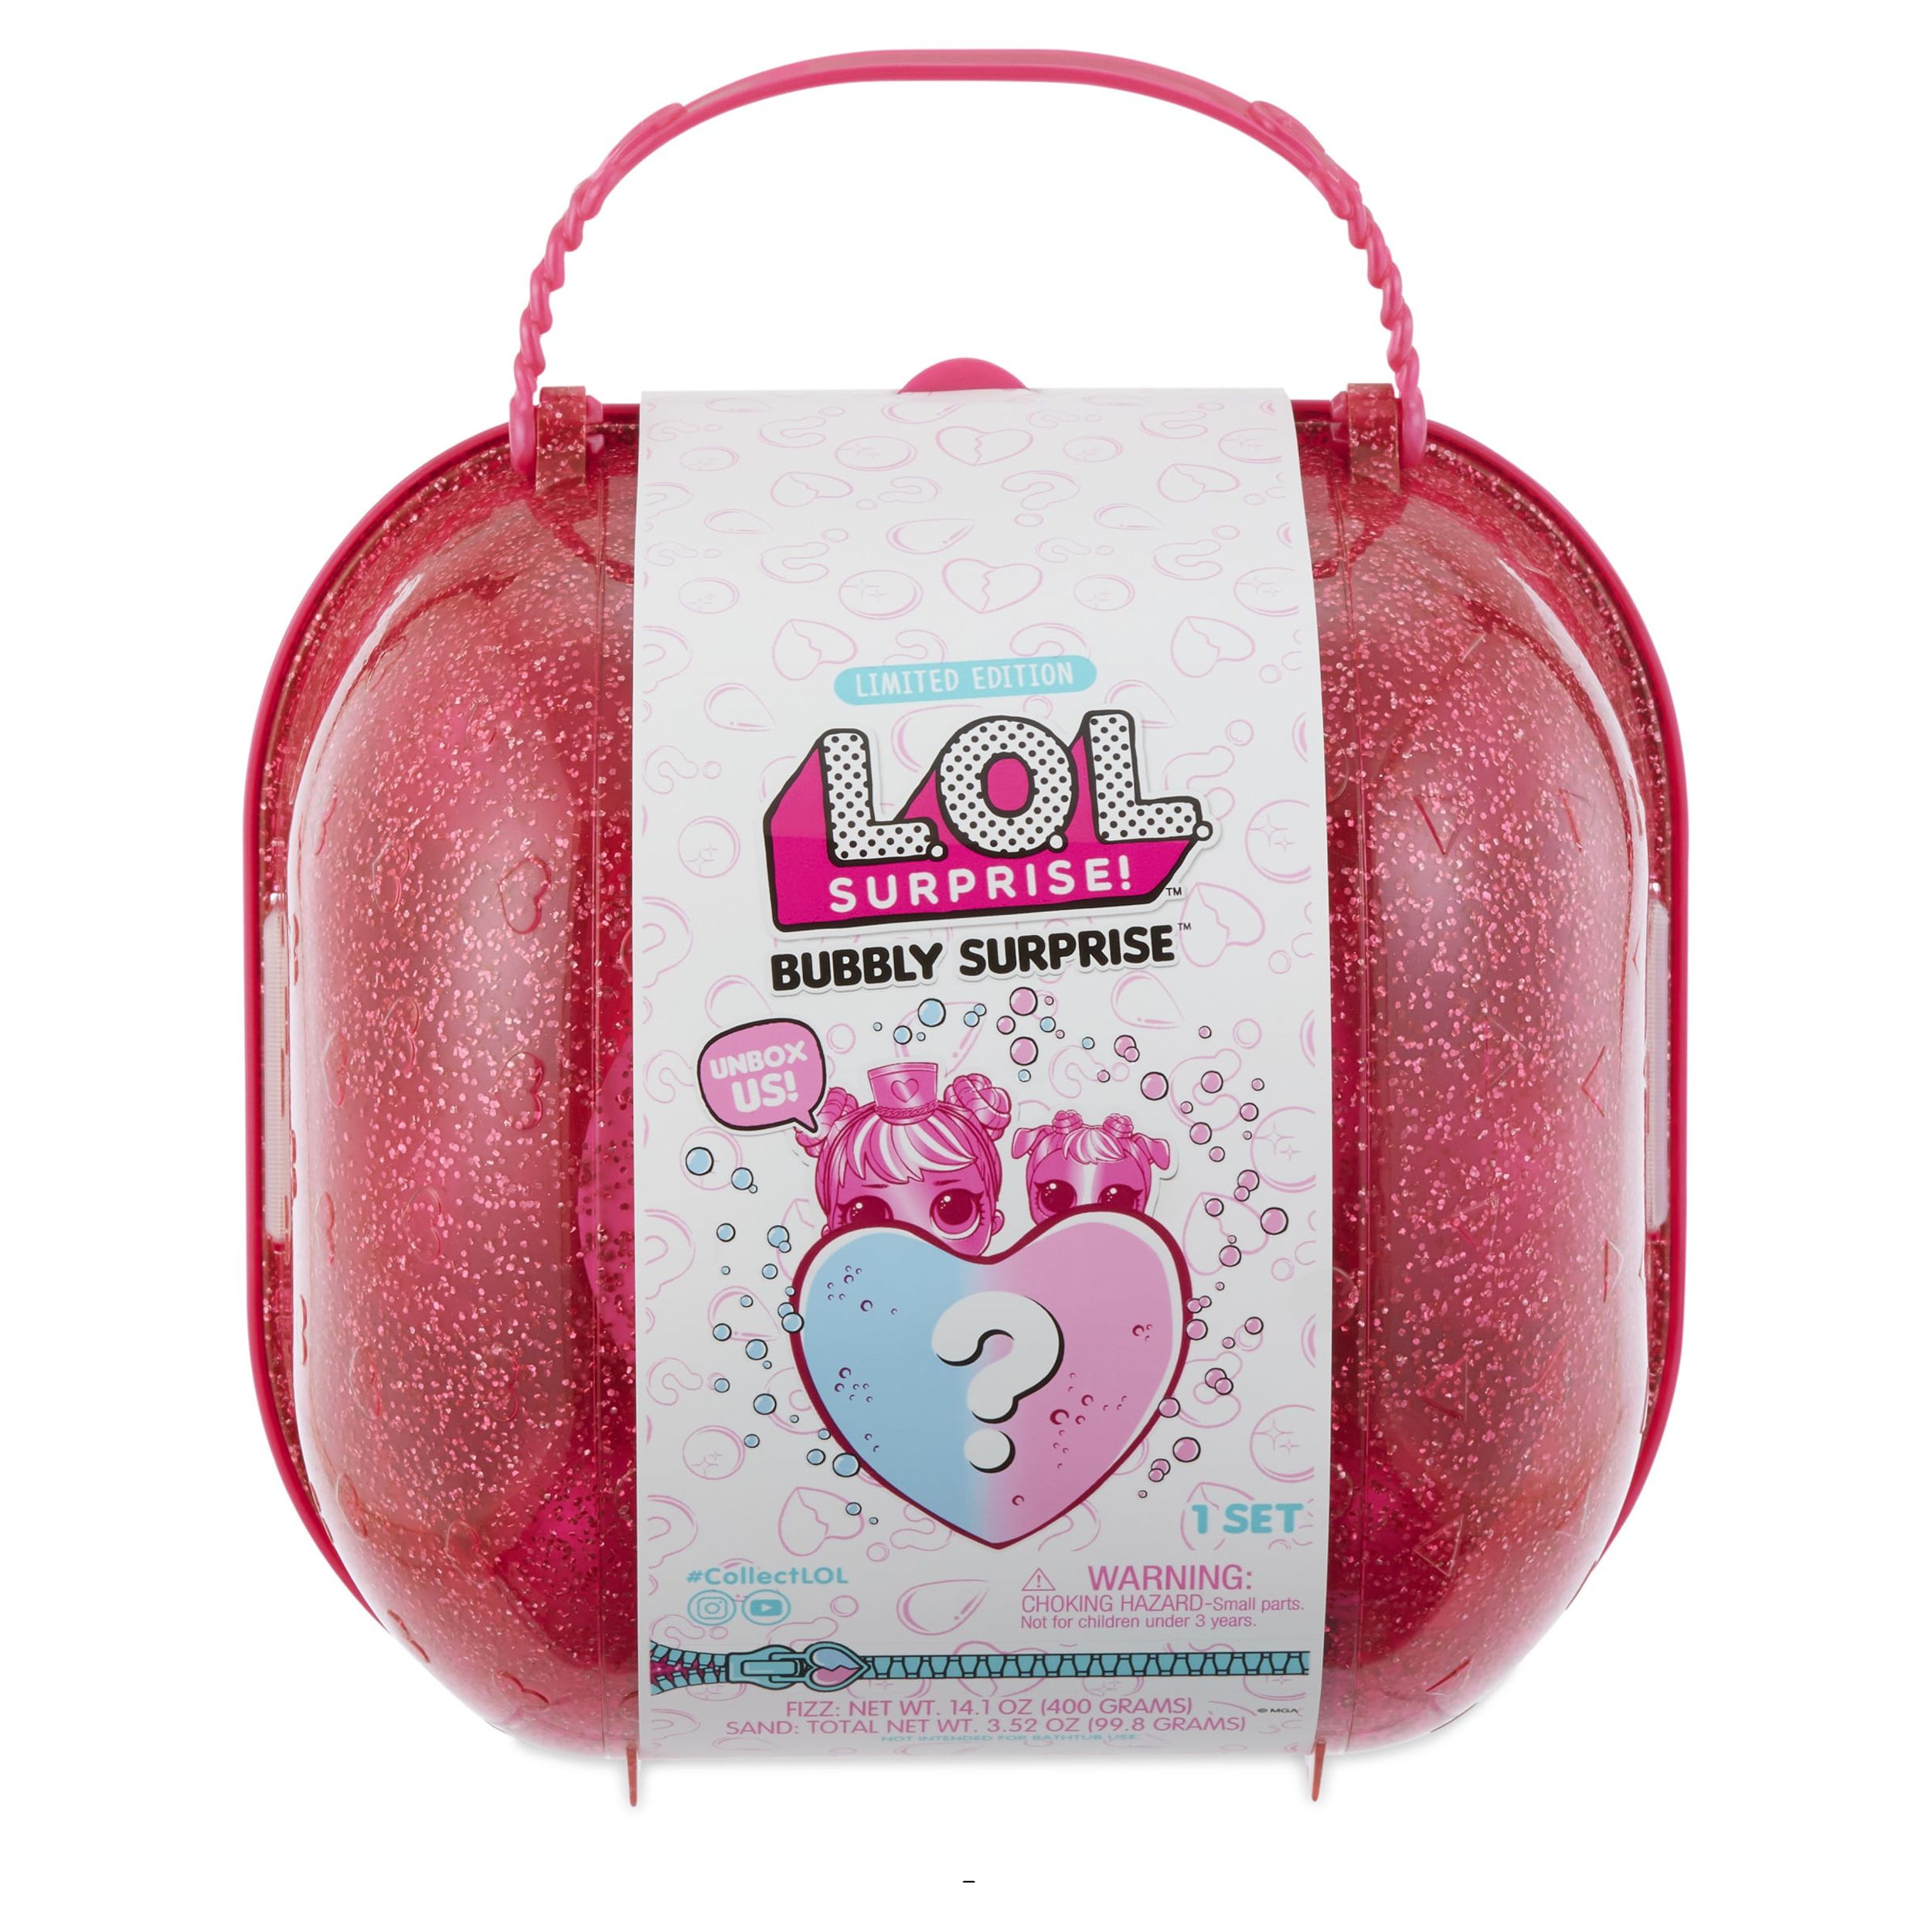 LOL Surprise Bubbly Surprise (Pink) With Exclusive Doll and Pet, Great Gift for Kids Ages 4 5 6+ - image 1 of 6